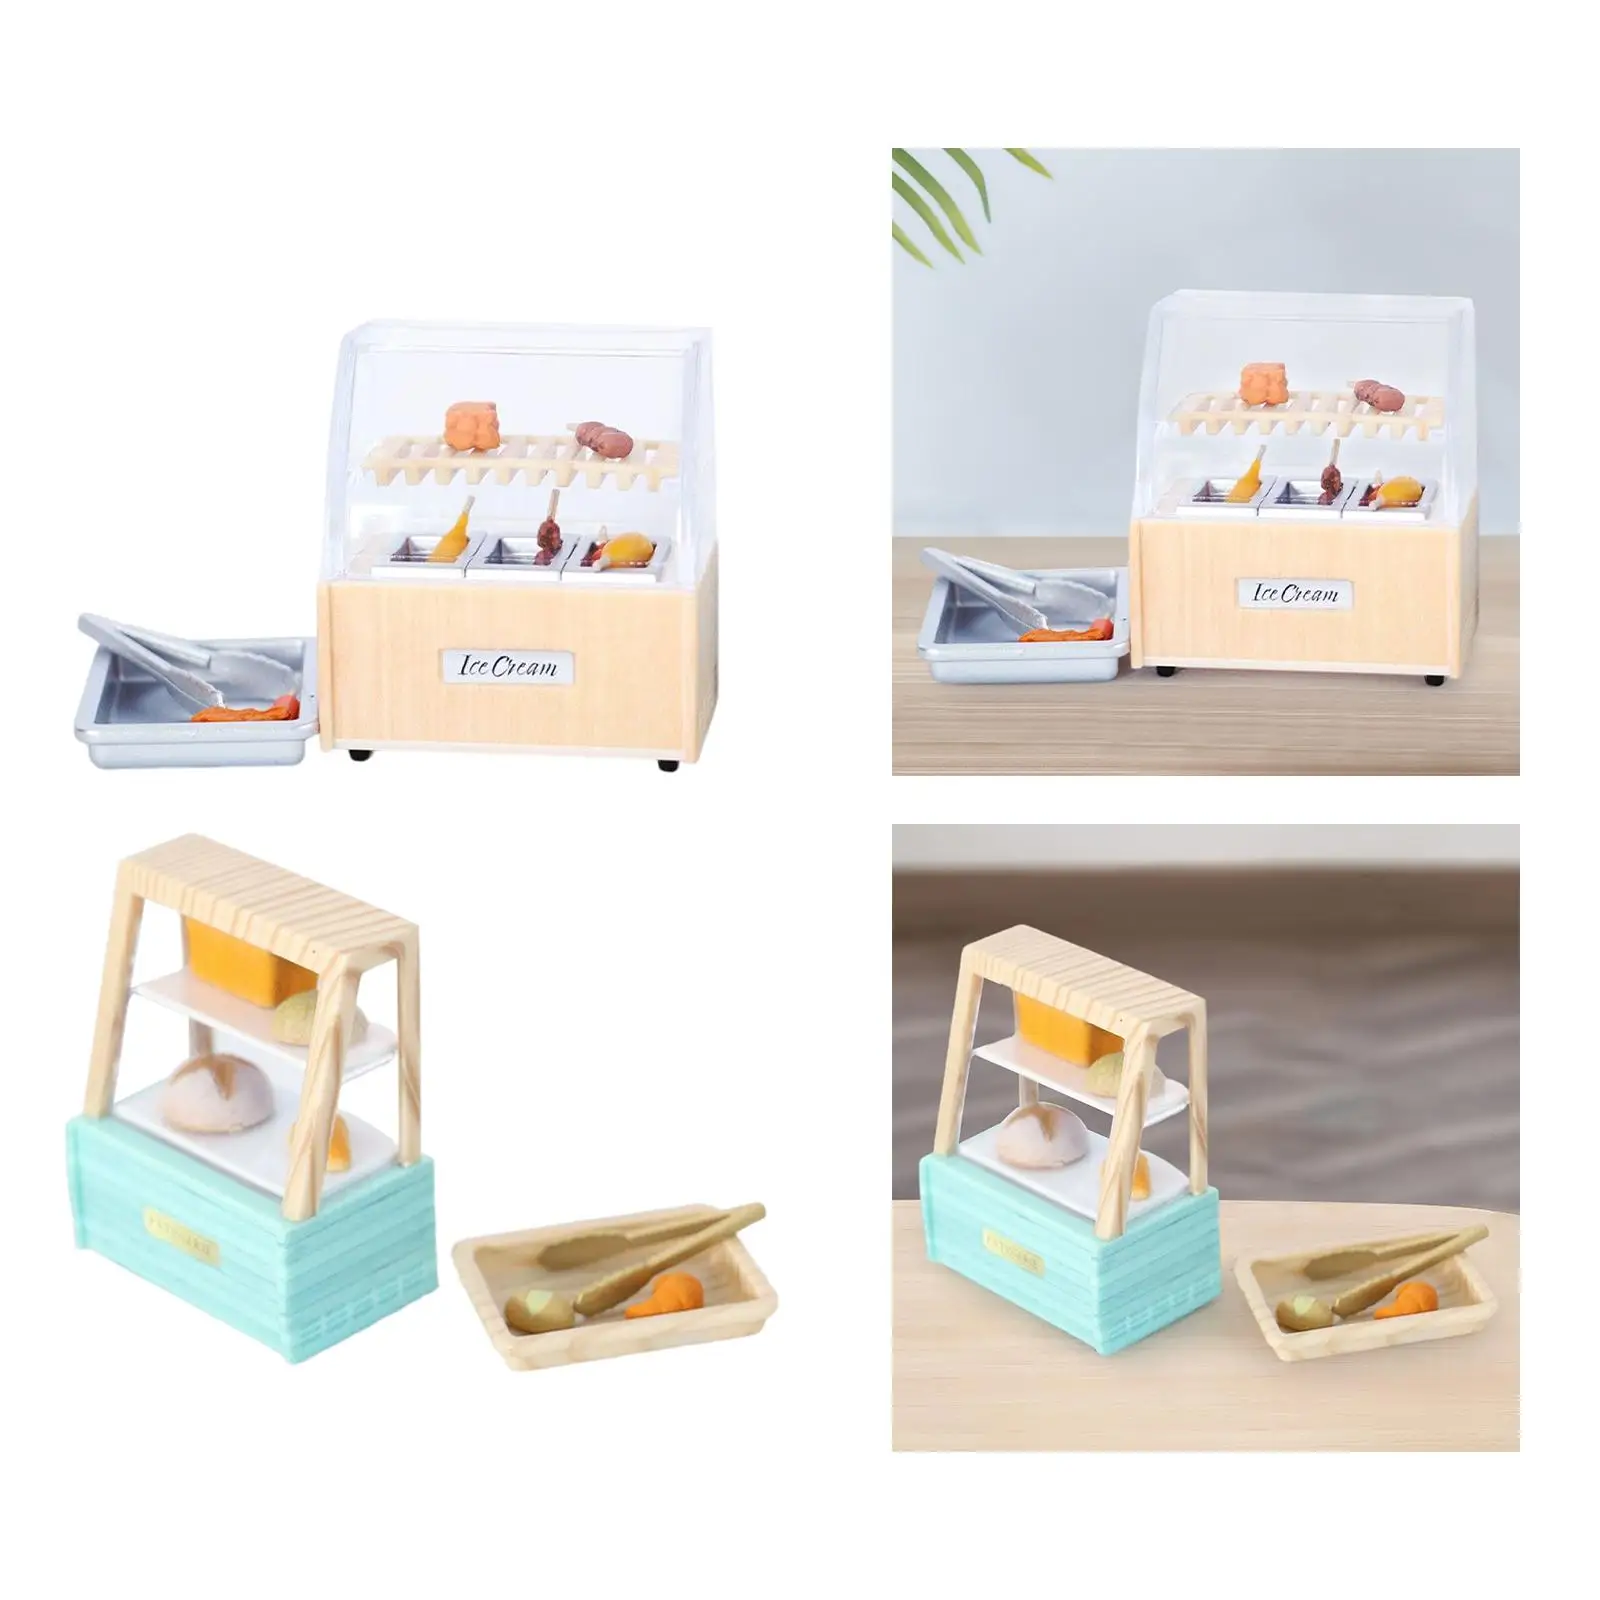 1/12 Dollhouse Shop Cabinet Life Scenes Ornaments Simulated Furniture Model DIY Projects Micro Landscape for Children Gifts